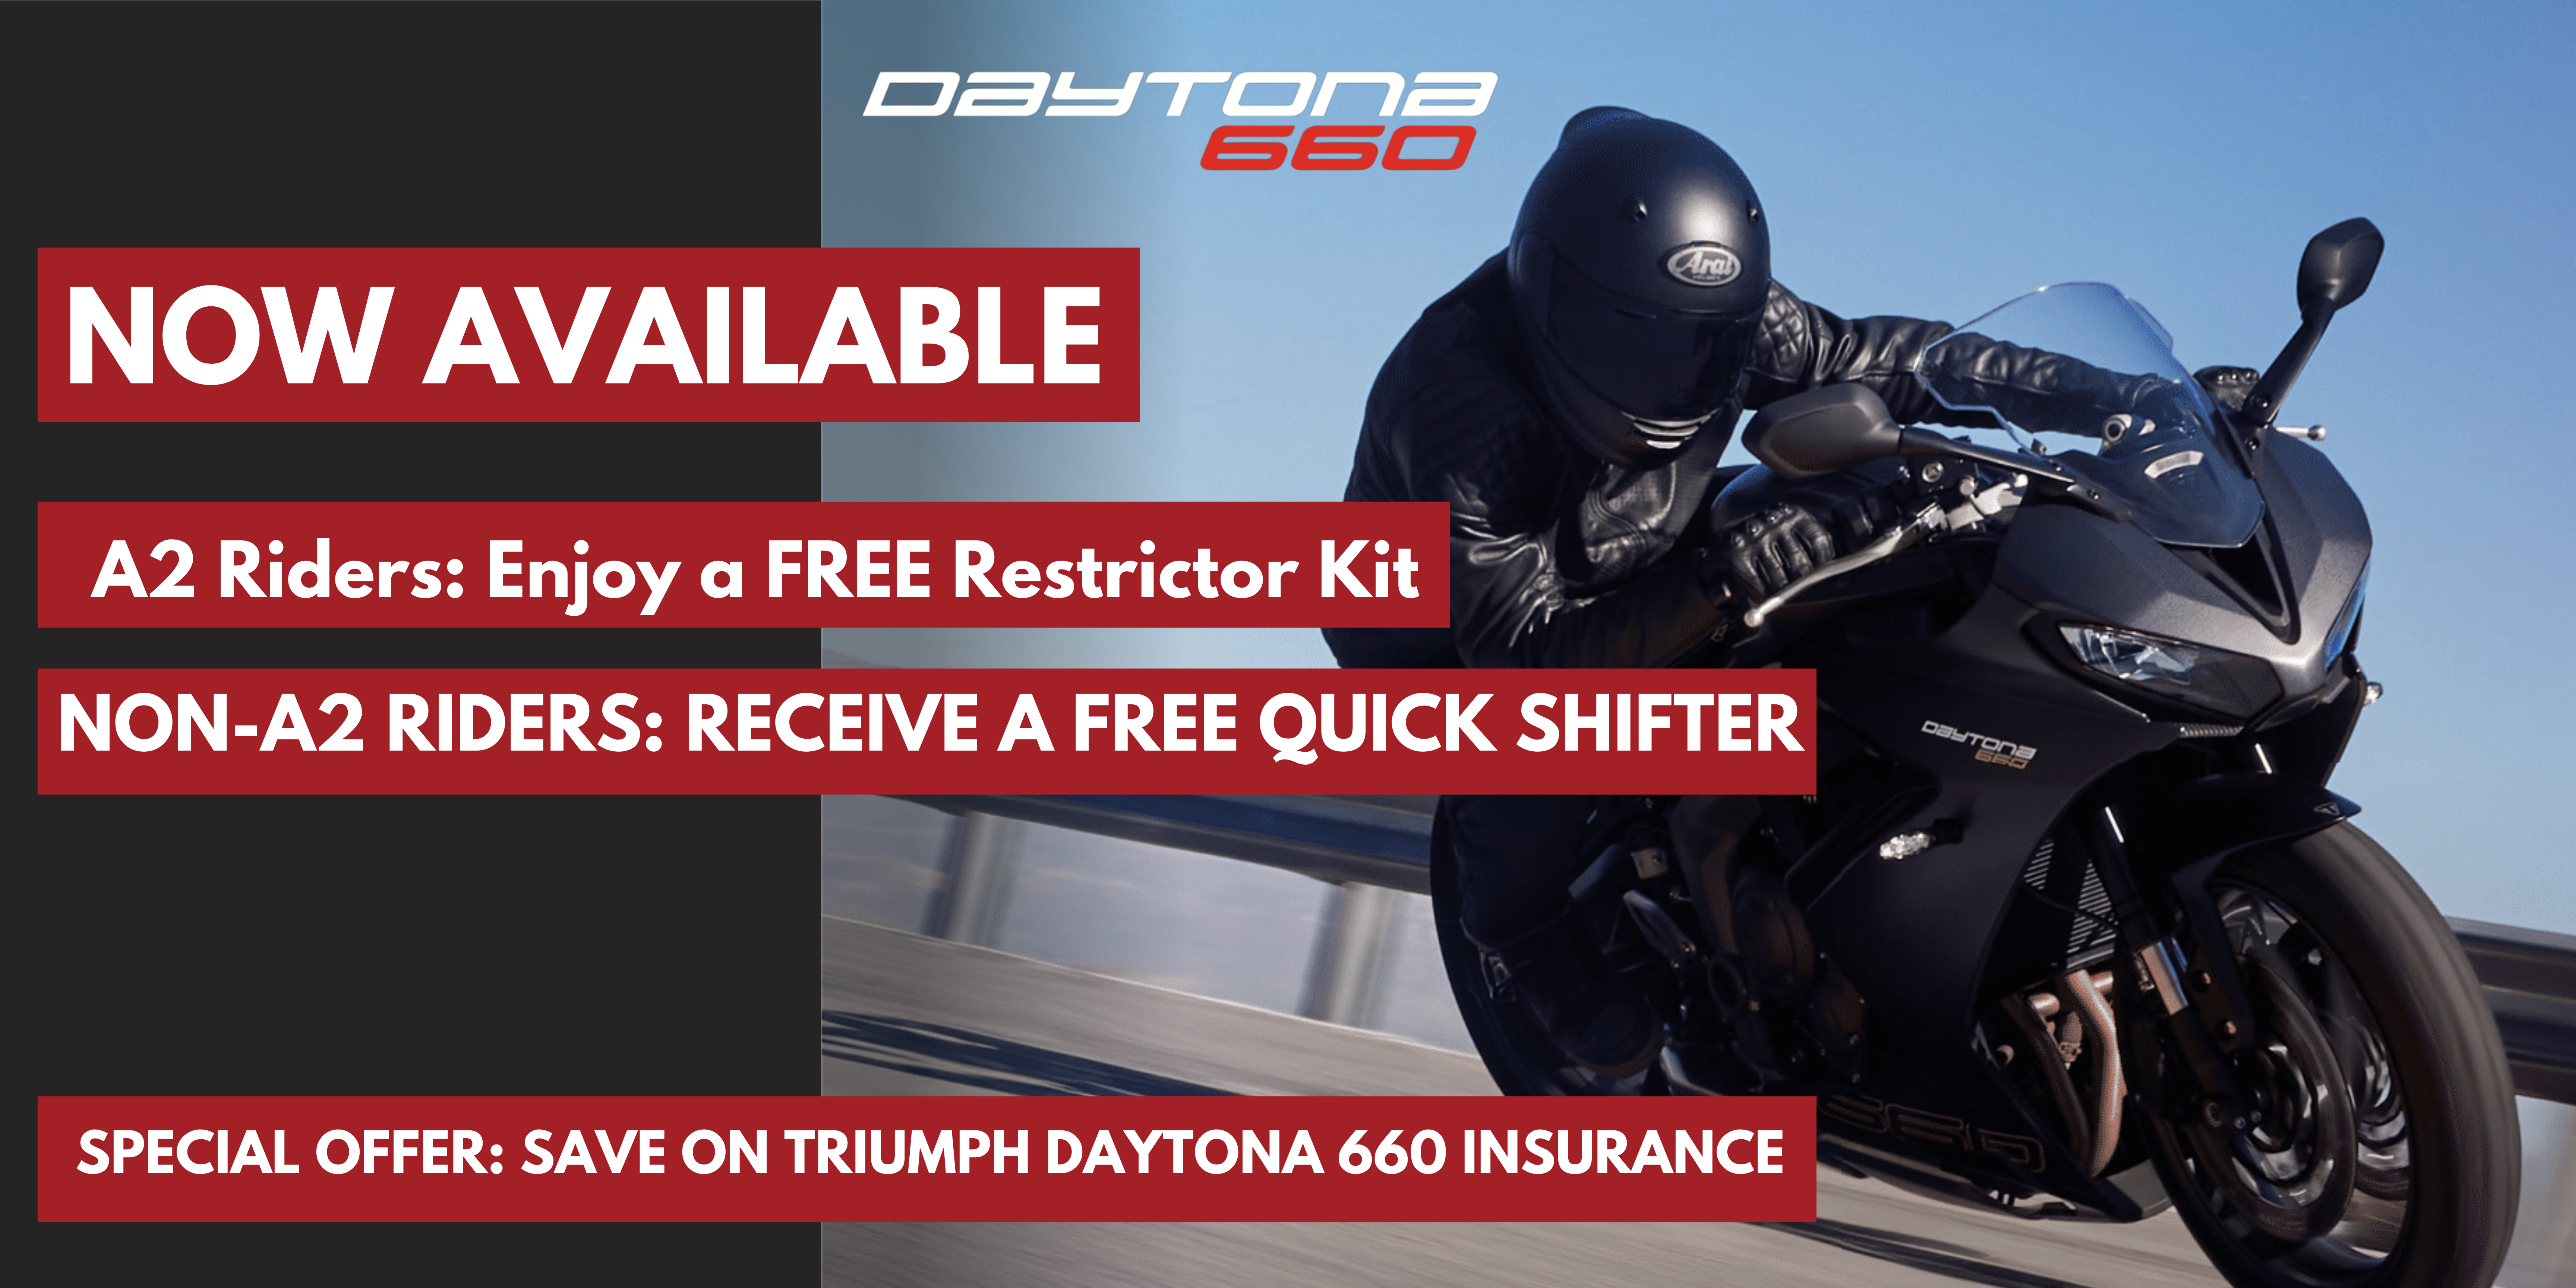 Exciting Offer on the Daytona 660 Triumph!